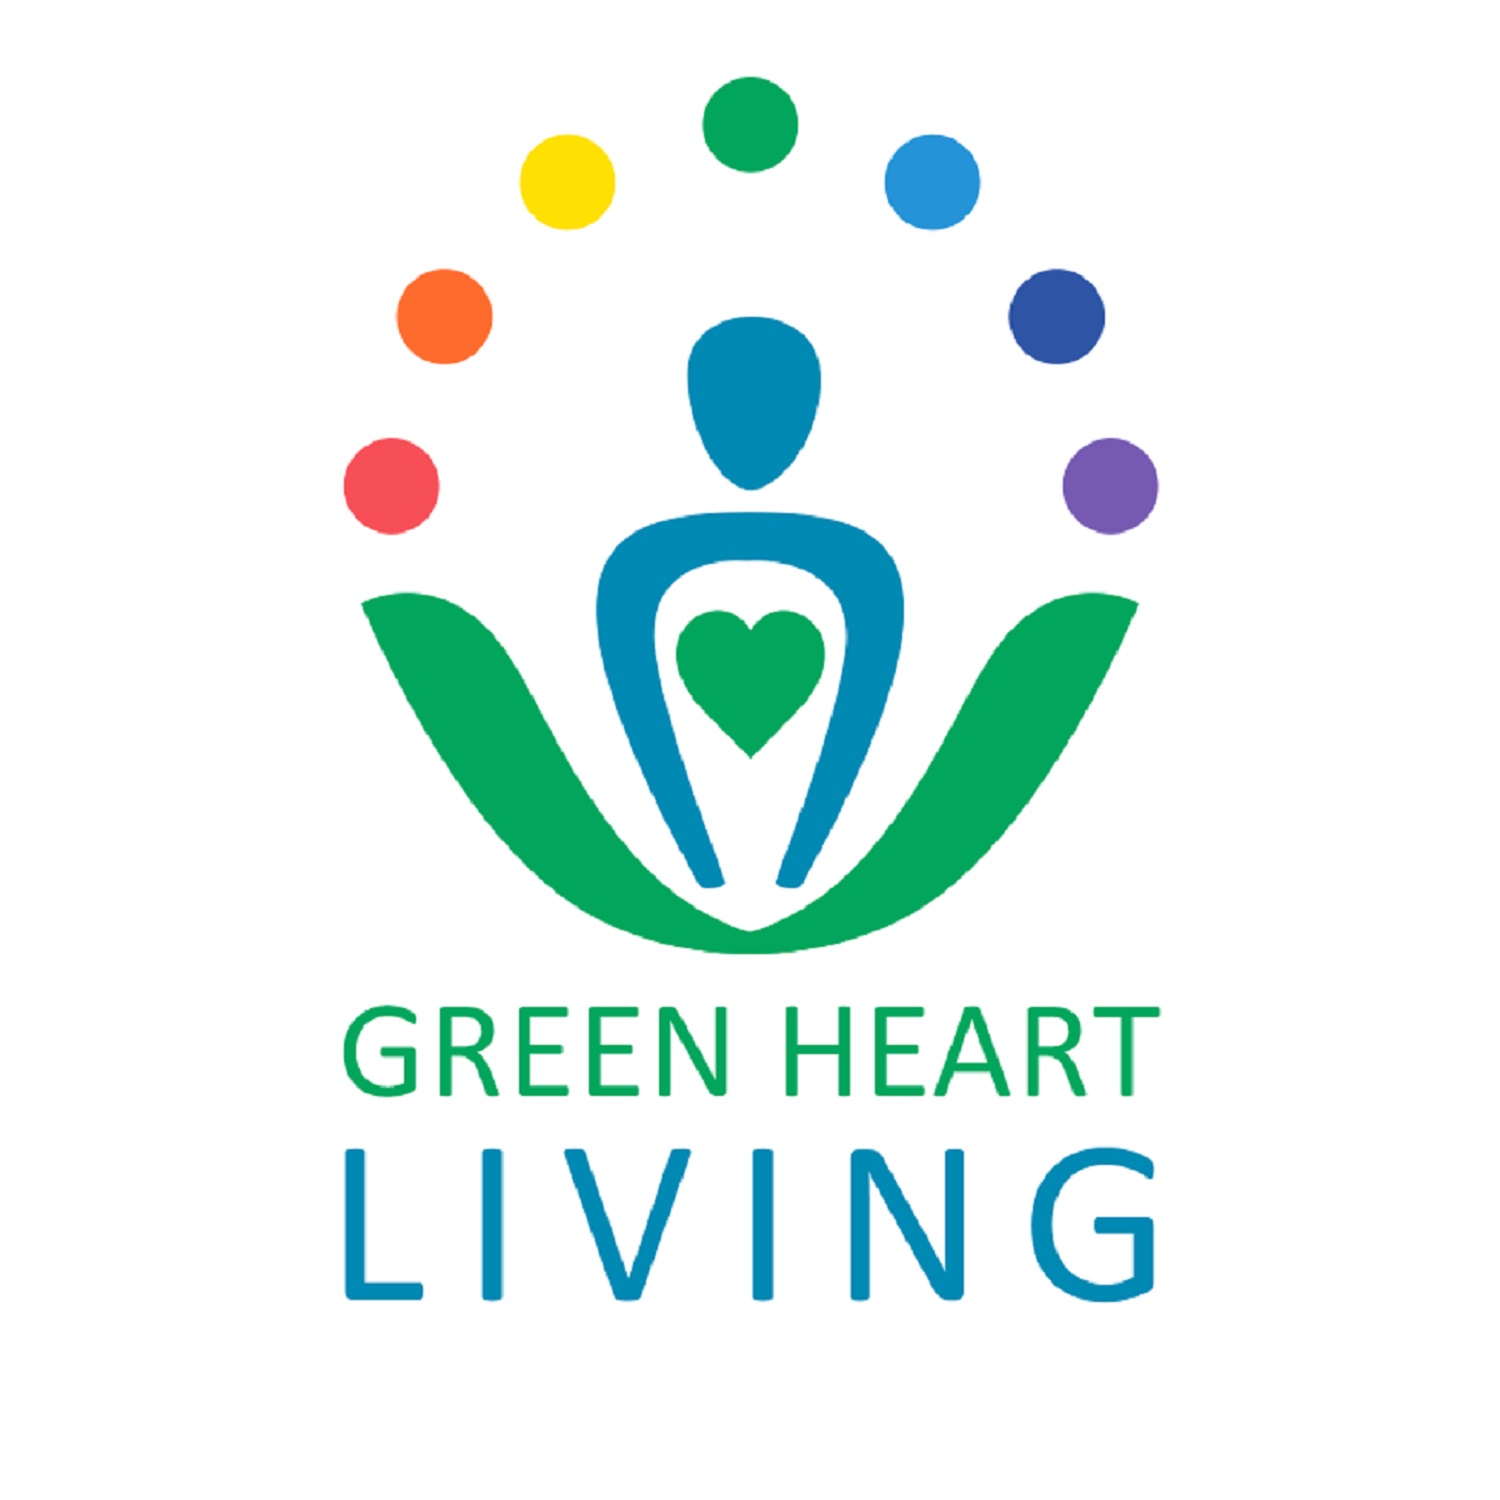 The Green Heart Living Podcast